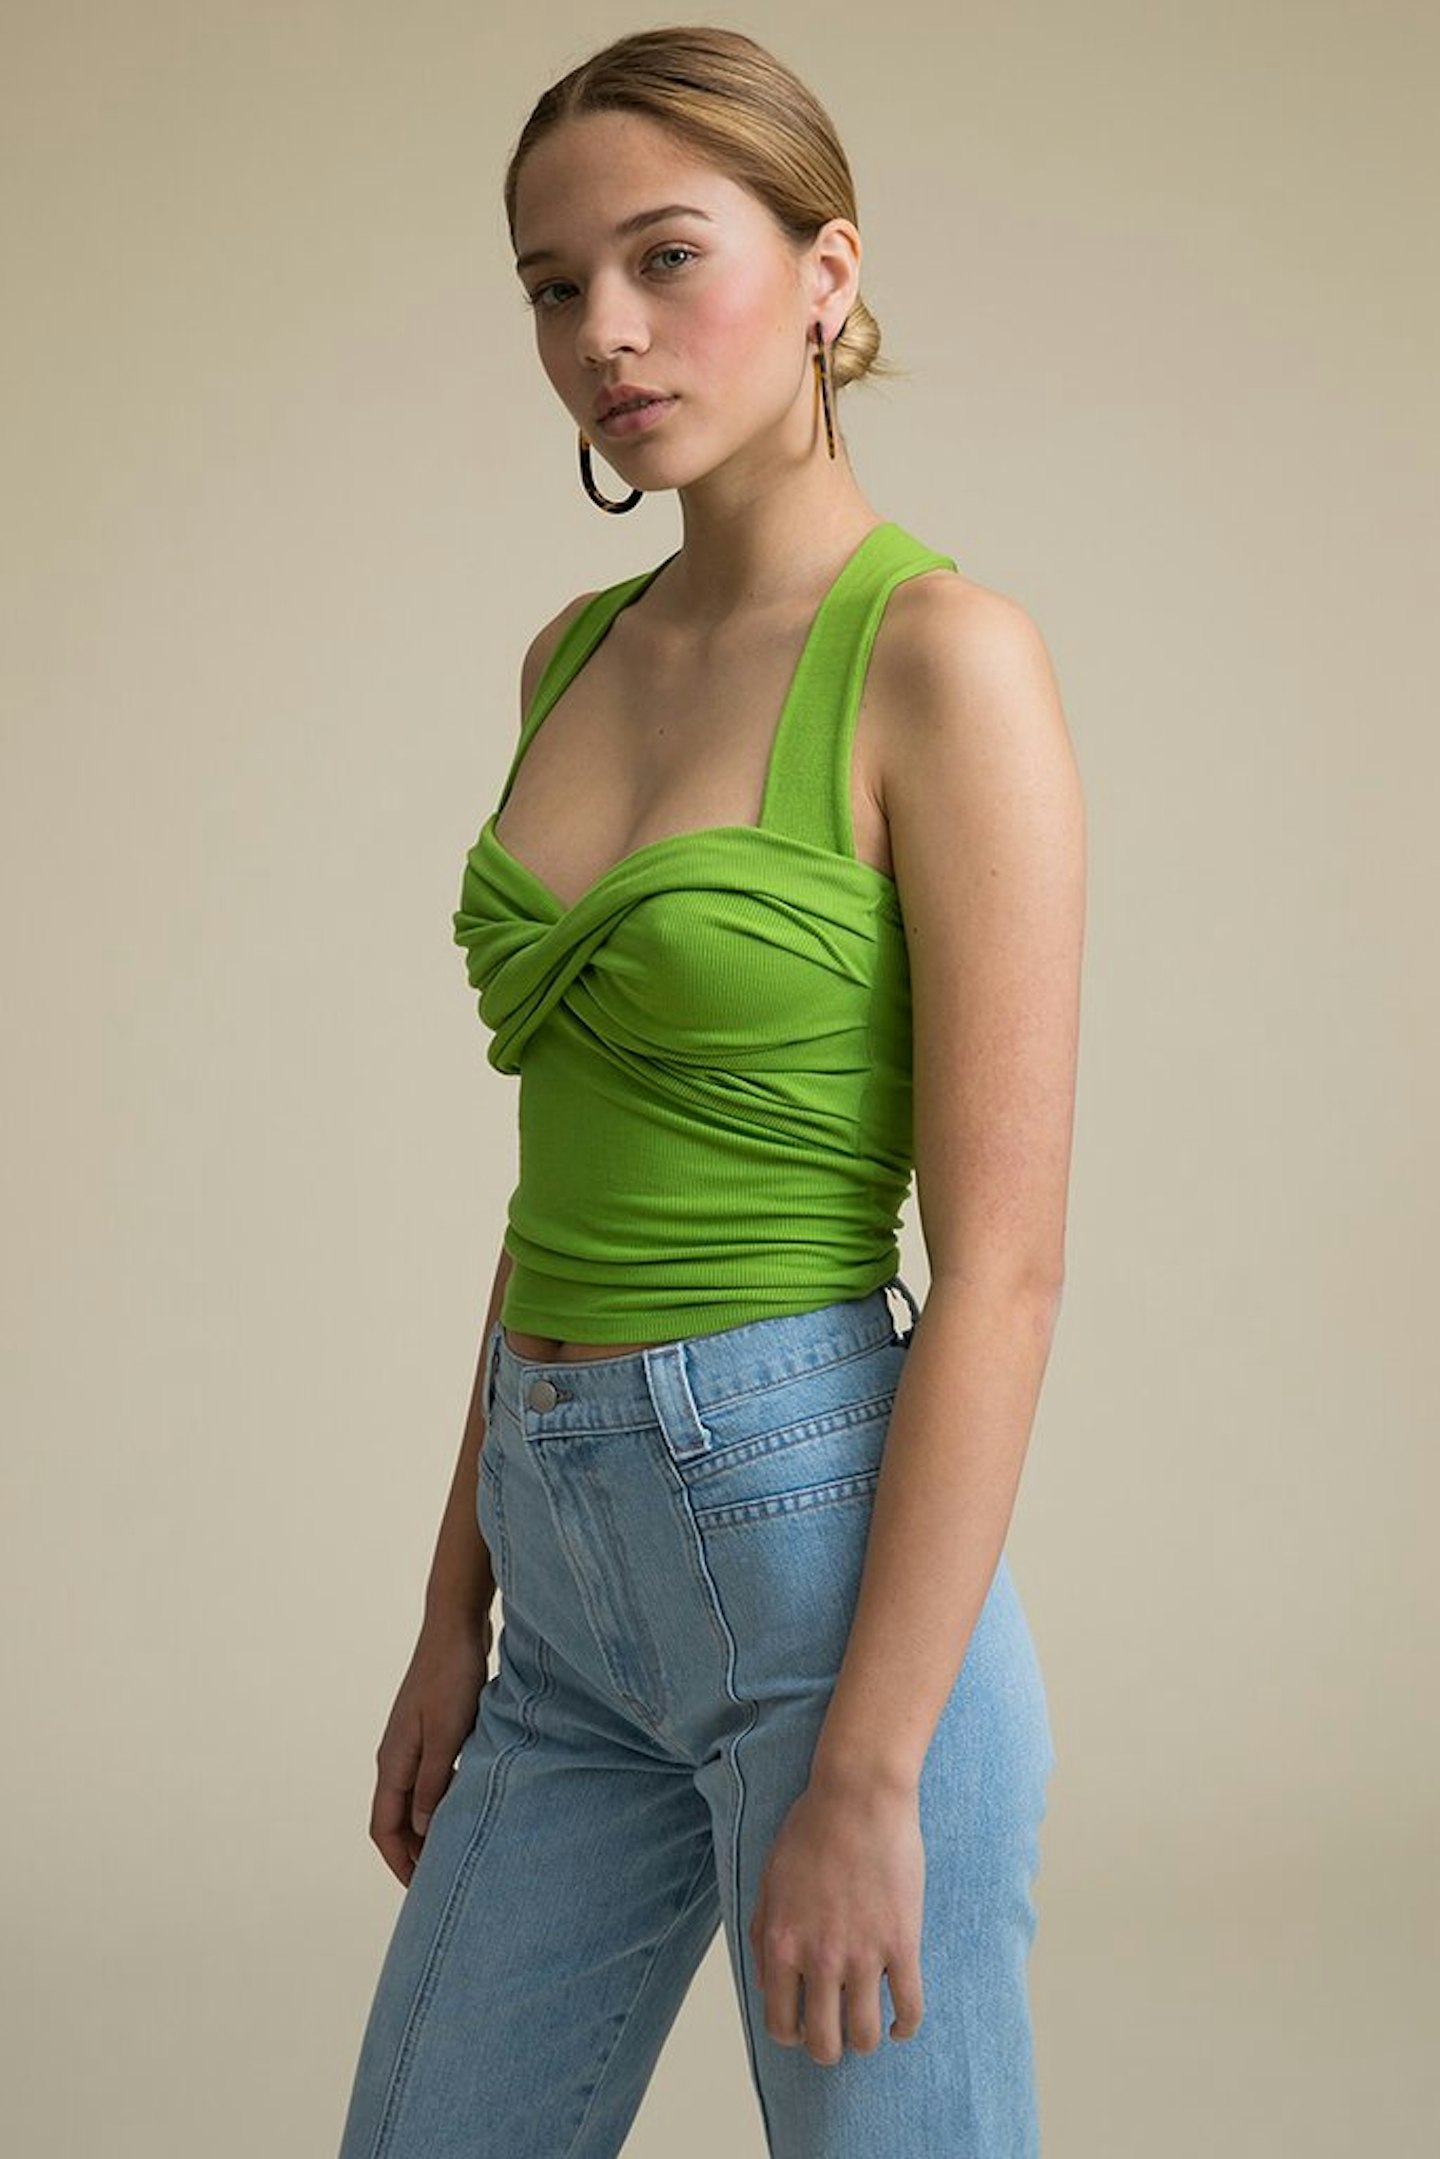 The Line By K, Izy Top Apple Green, £69